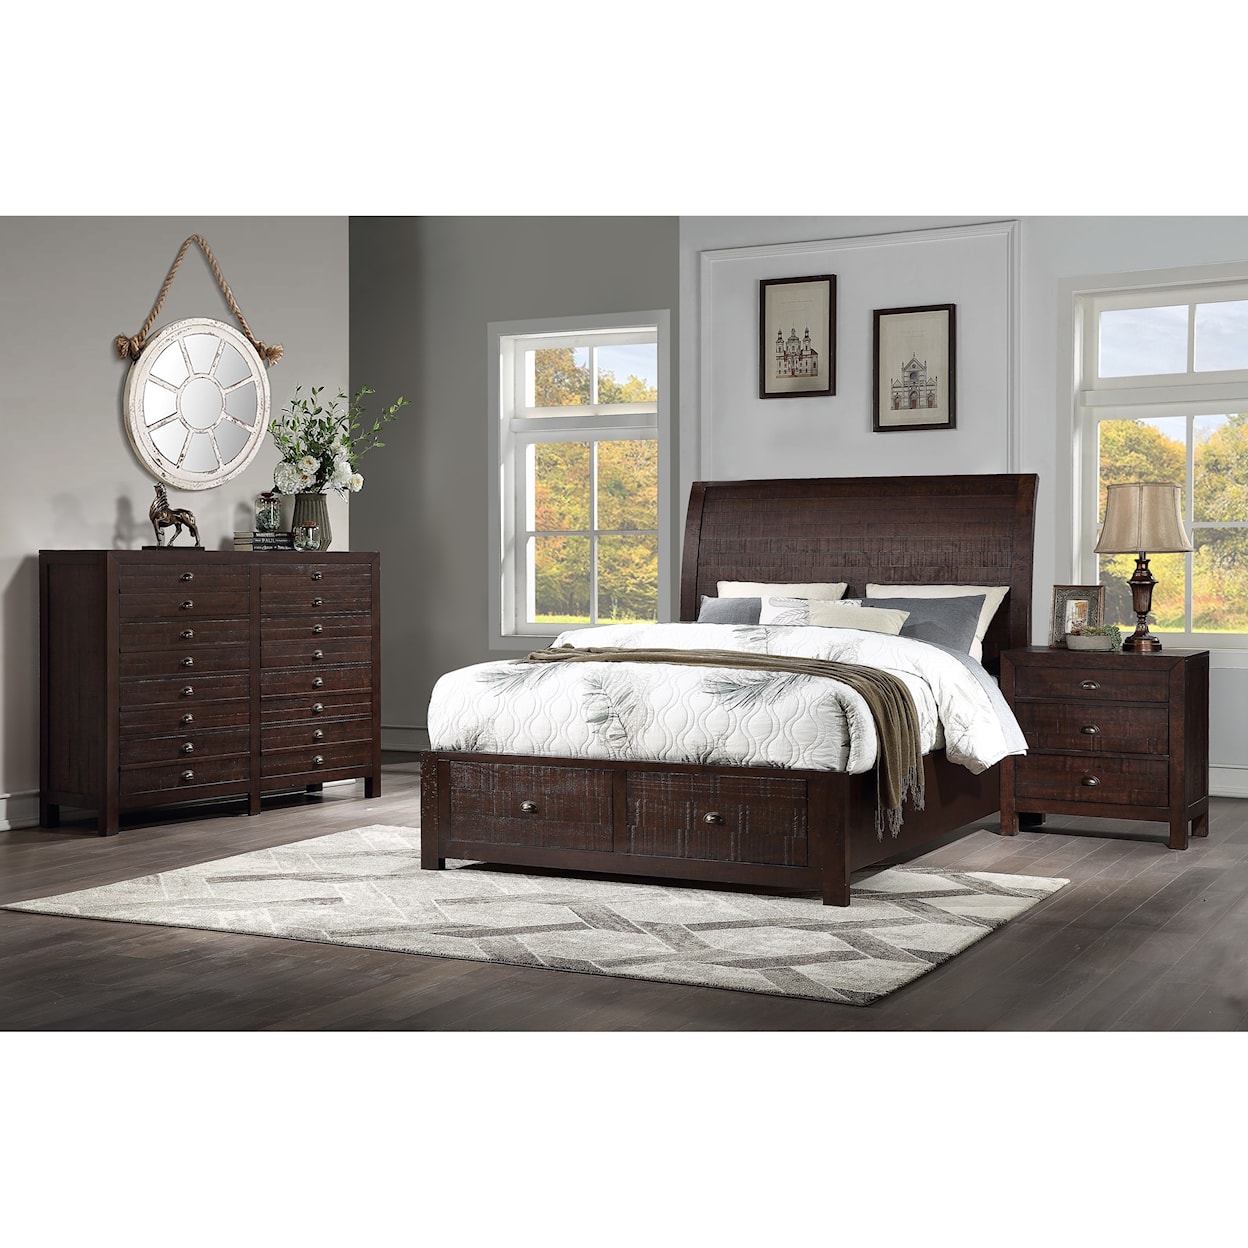 Winners Only Union 28" 3-Drawer Nightstand